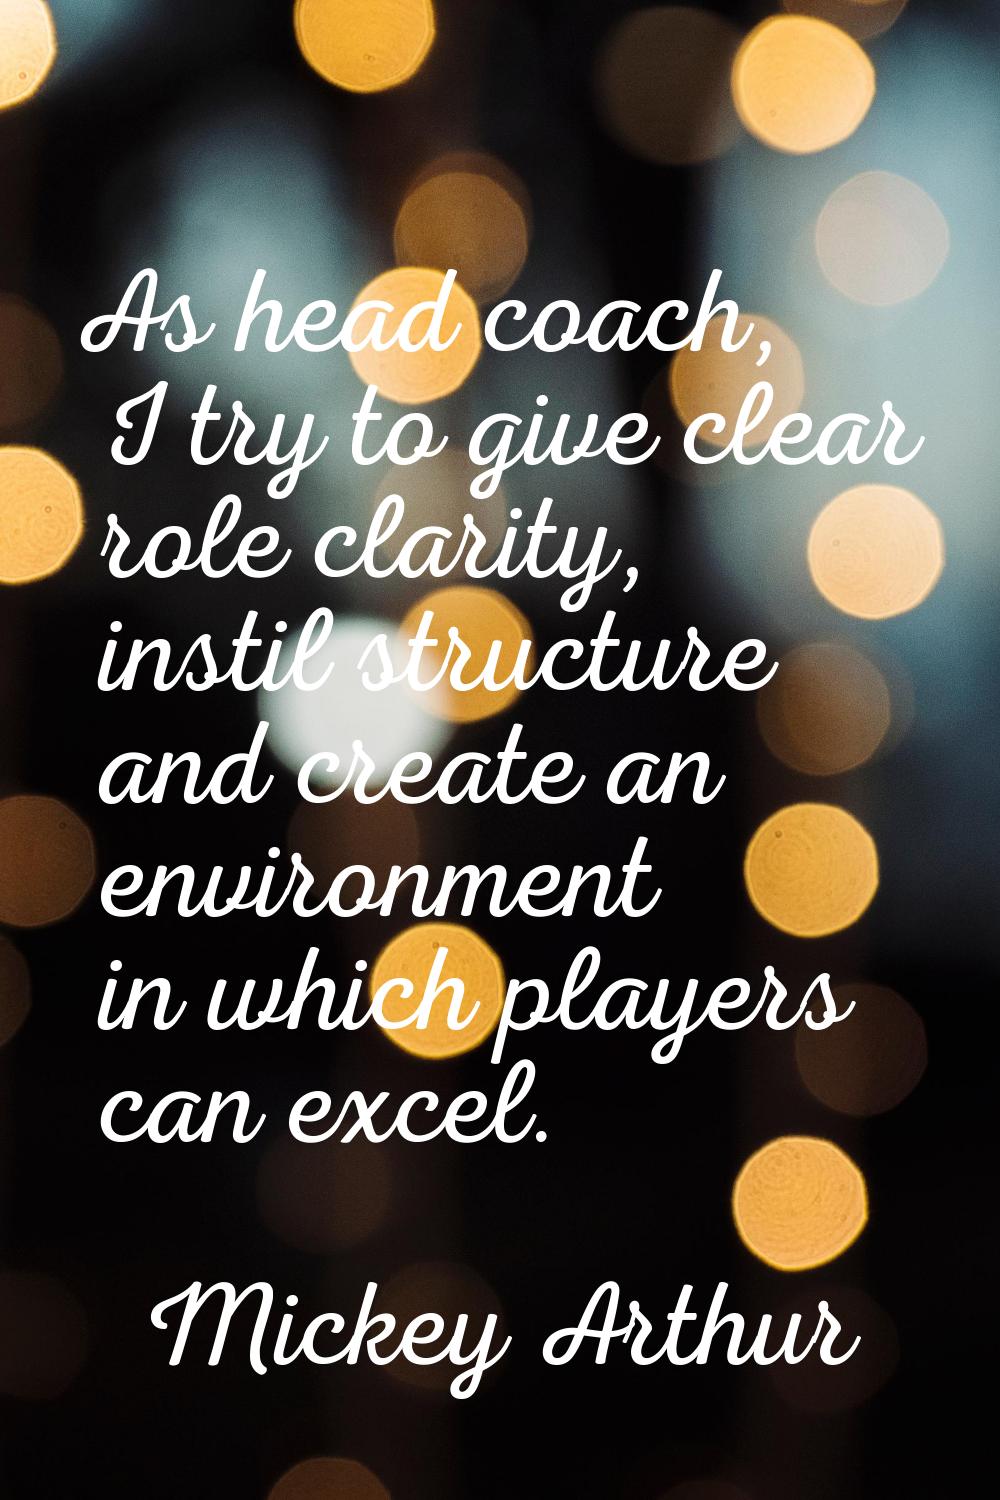 As head coach, I try to give clear role clarity, instil structure and create an environment in whic